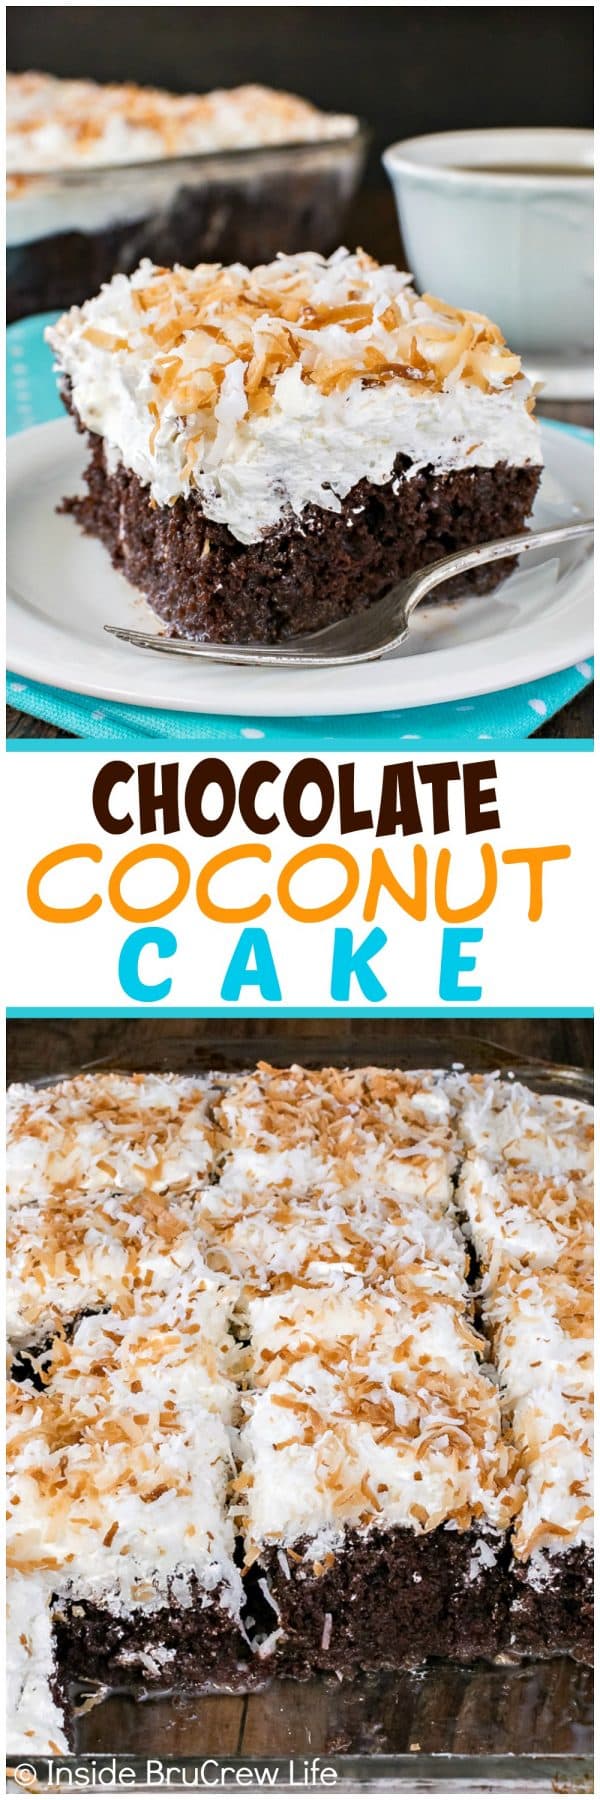 Chocolate Coconut Cake - this gooey chocolate cake is topped with three kinds of coconut goodness! Great cake recipe for spring or summer!!!